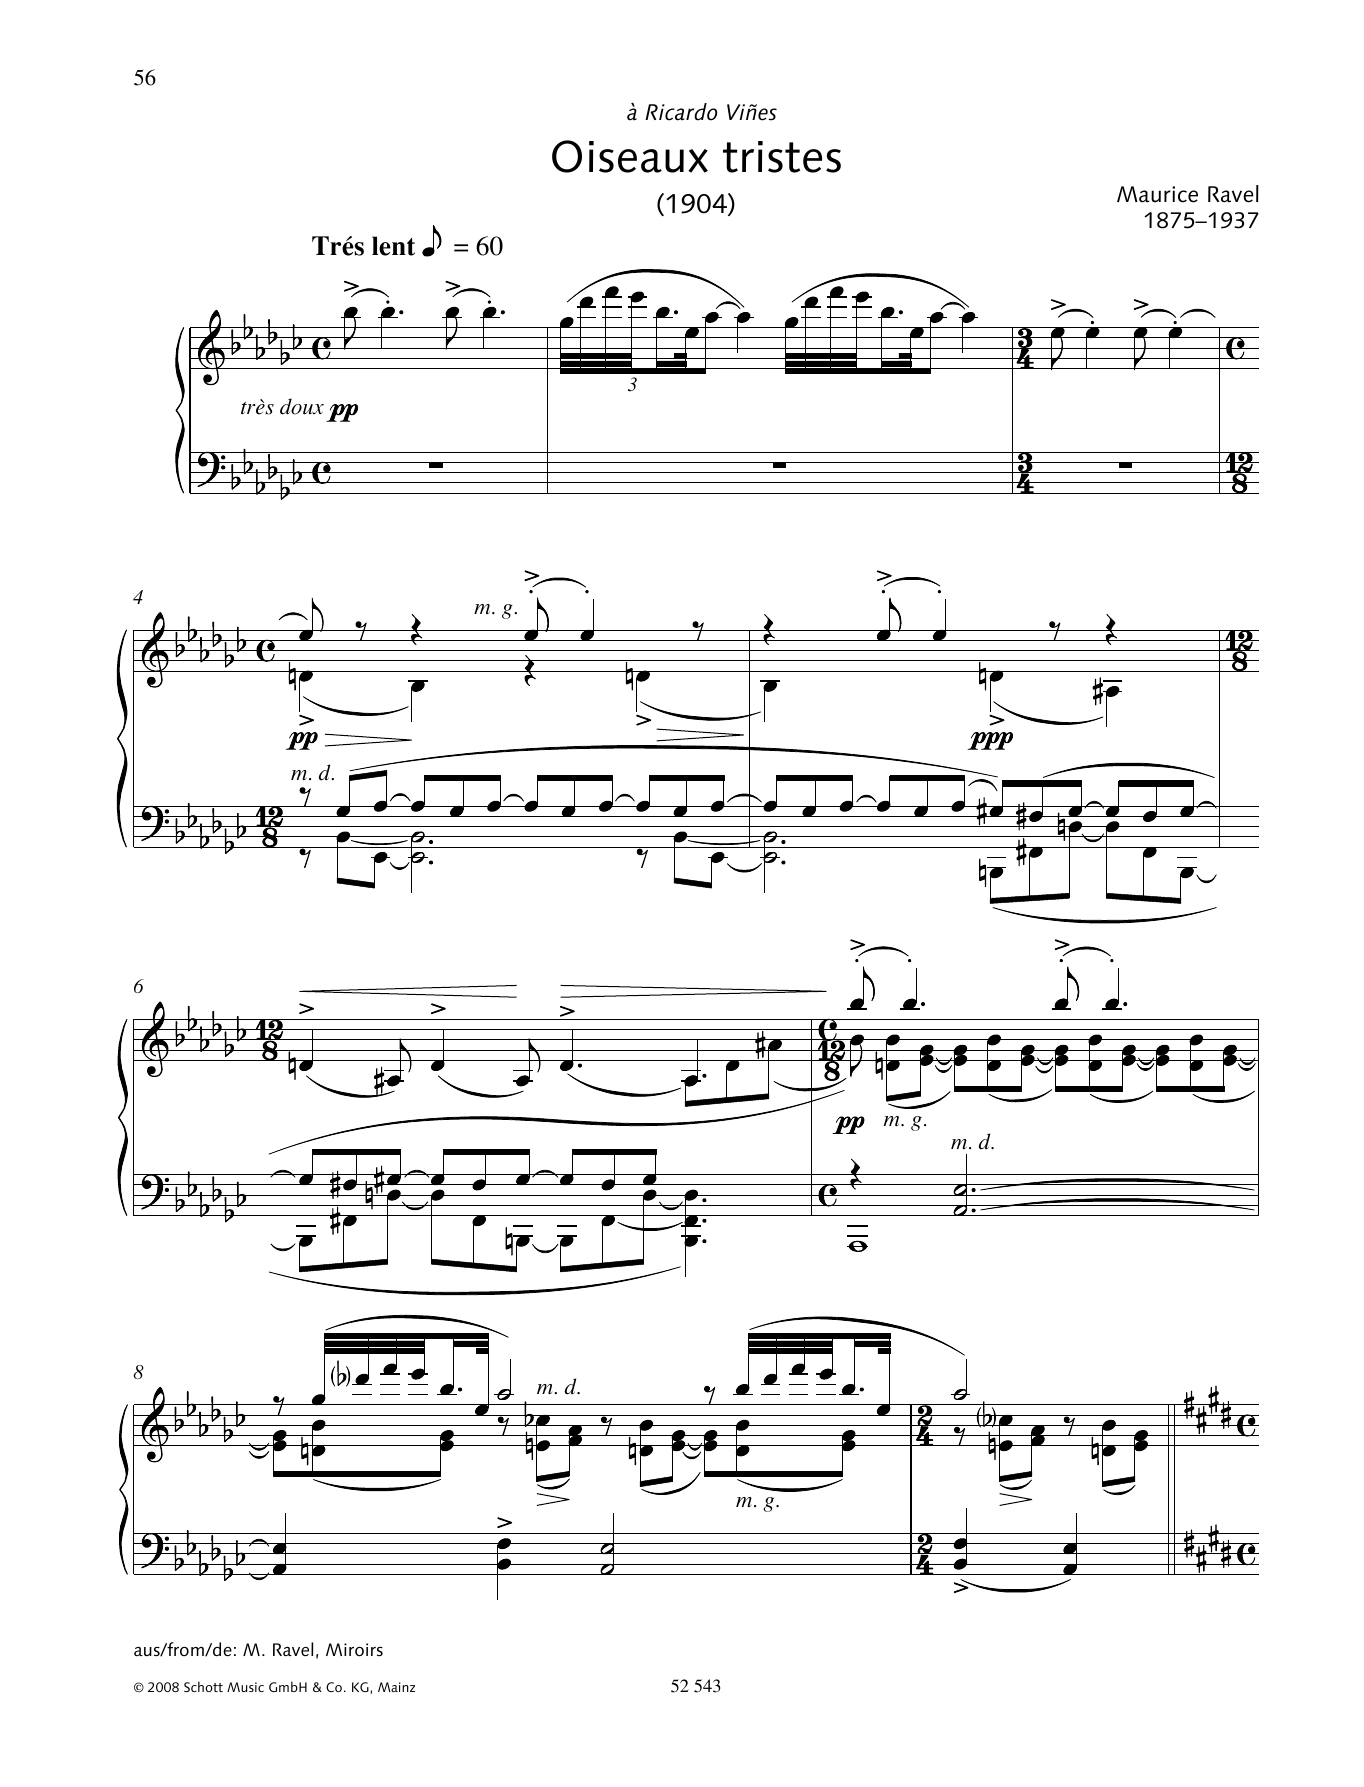 Maurice Ravel Oiseaux tristes sheet music notes and chords. Download Printable PDF.